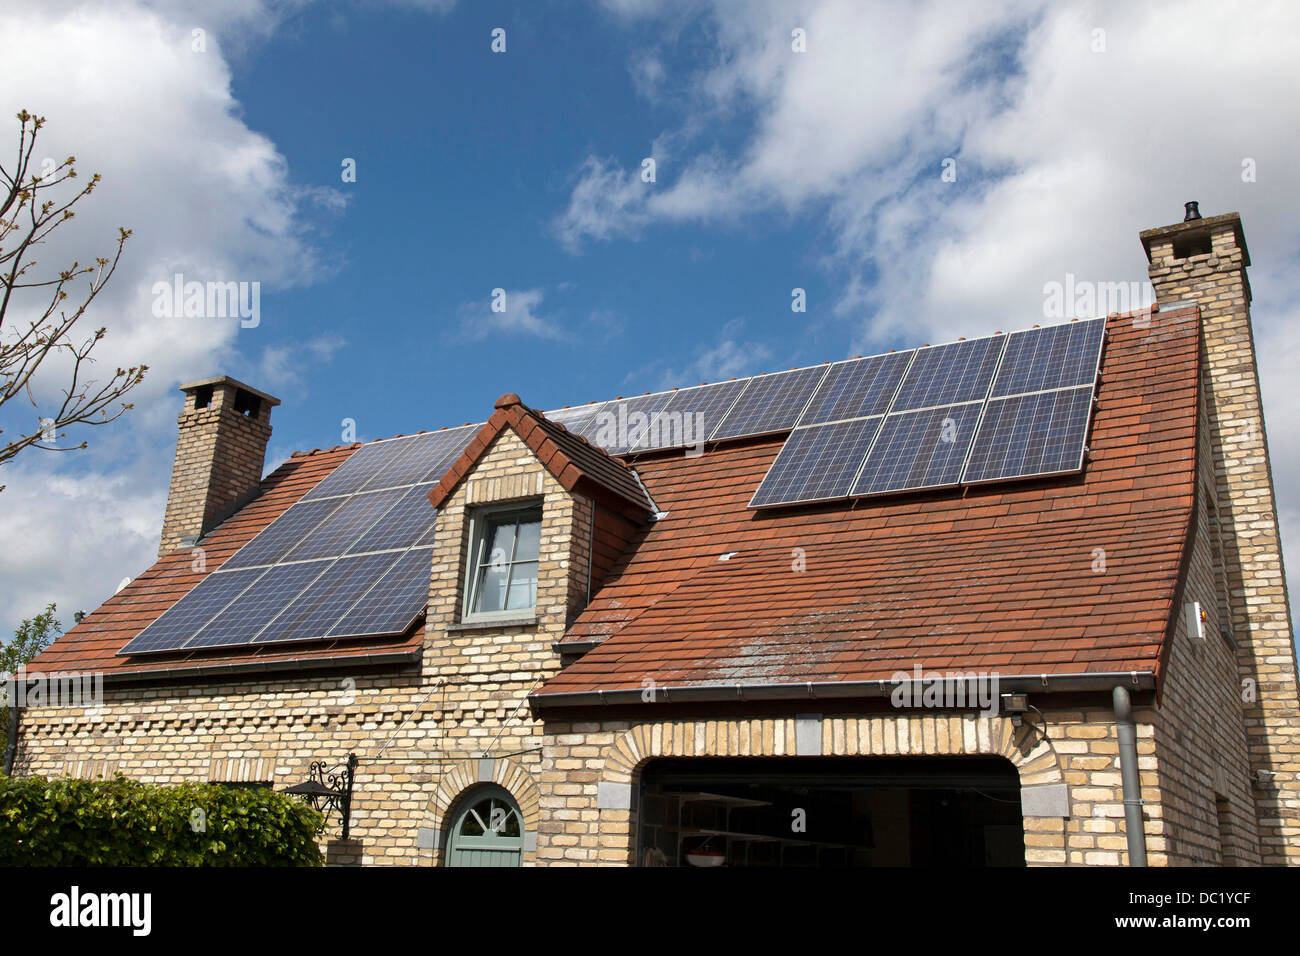 Detached house with solar panels on roof Stock Photo